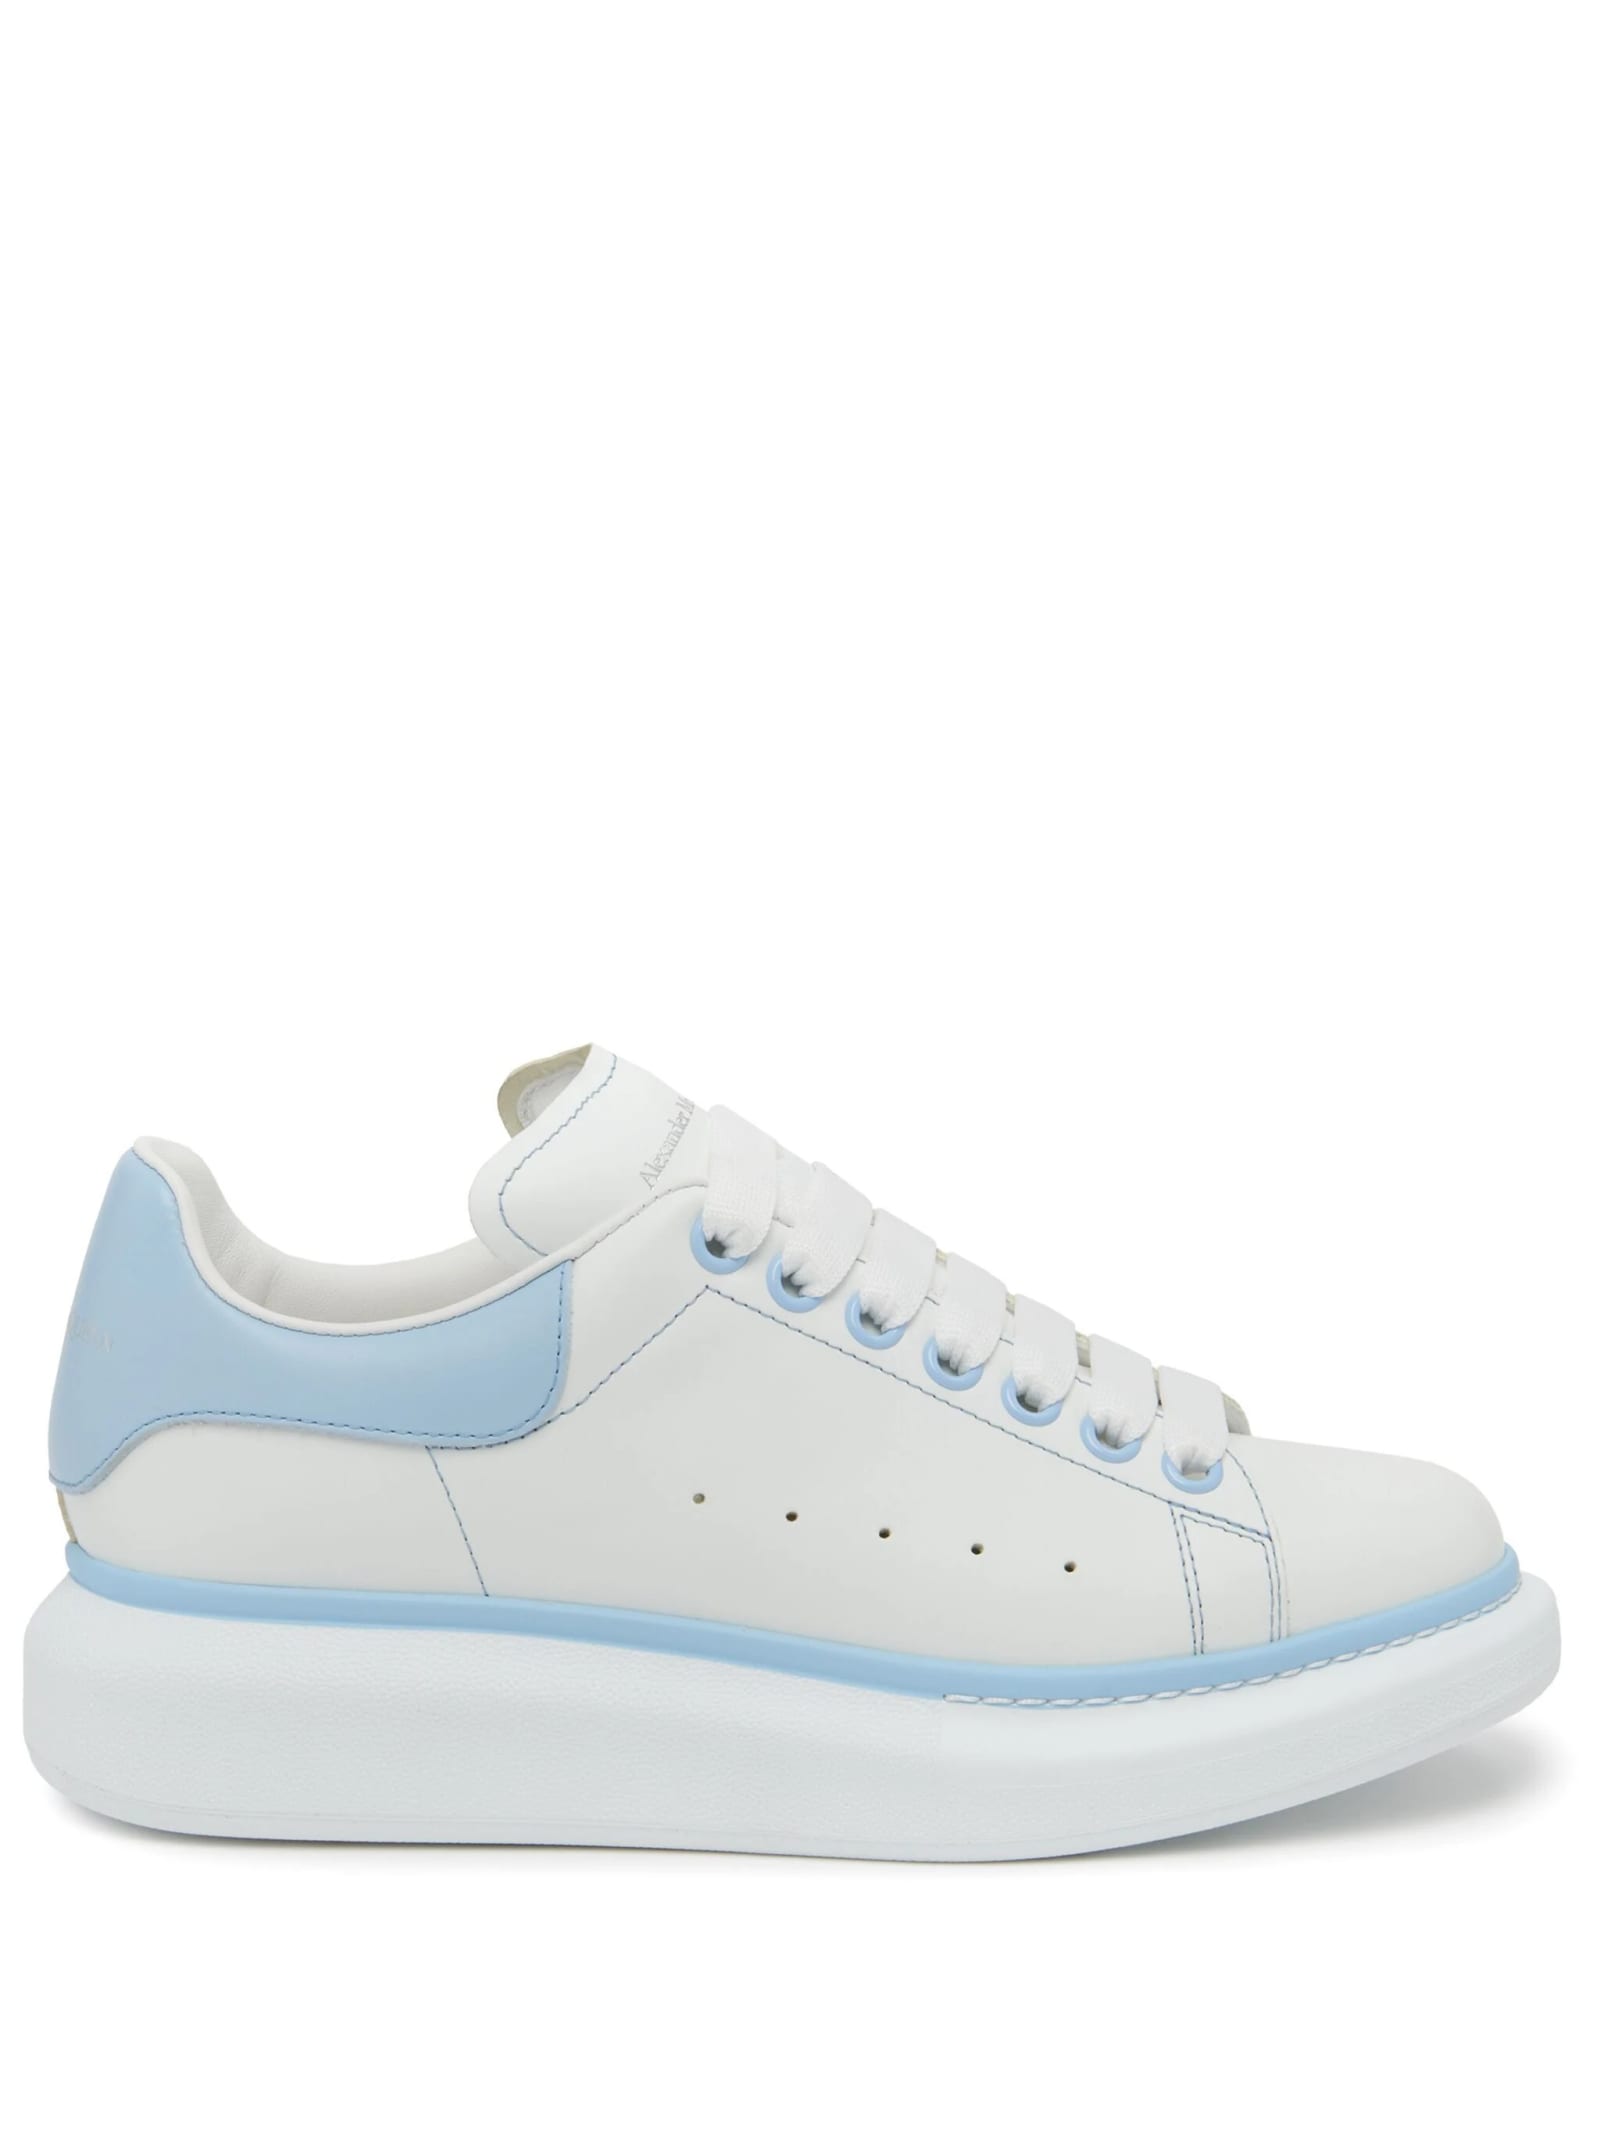 White Oversized Sneakers With Powder Blue Details